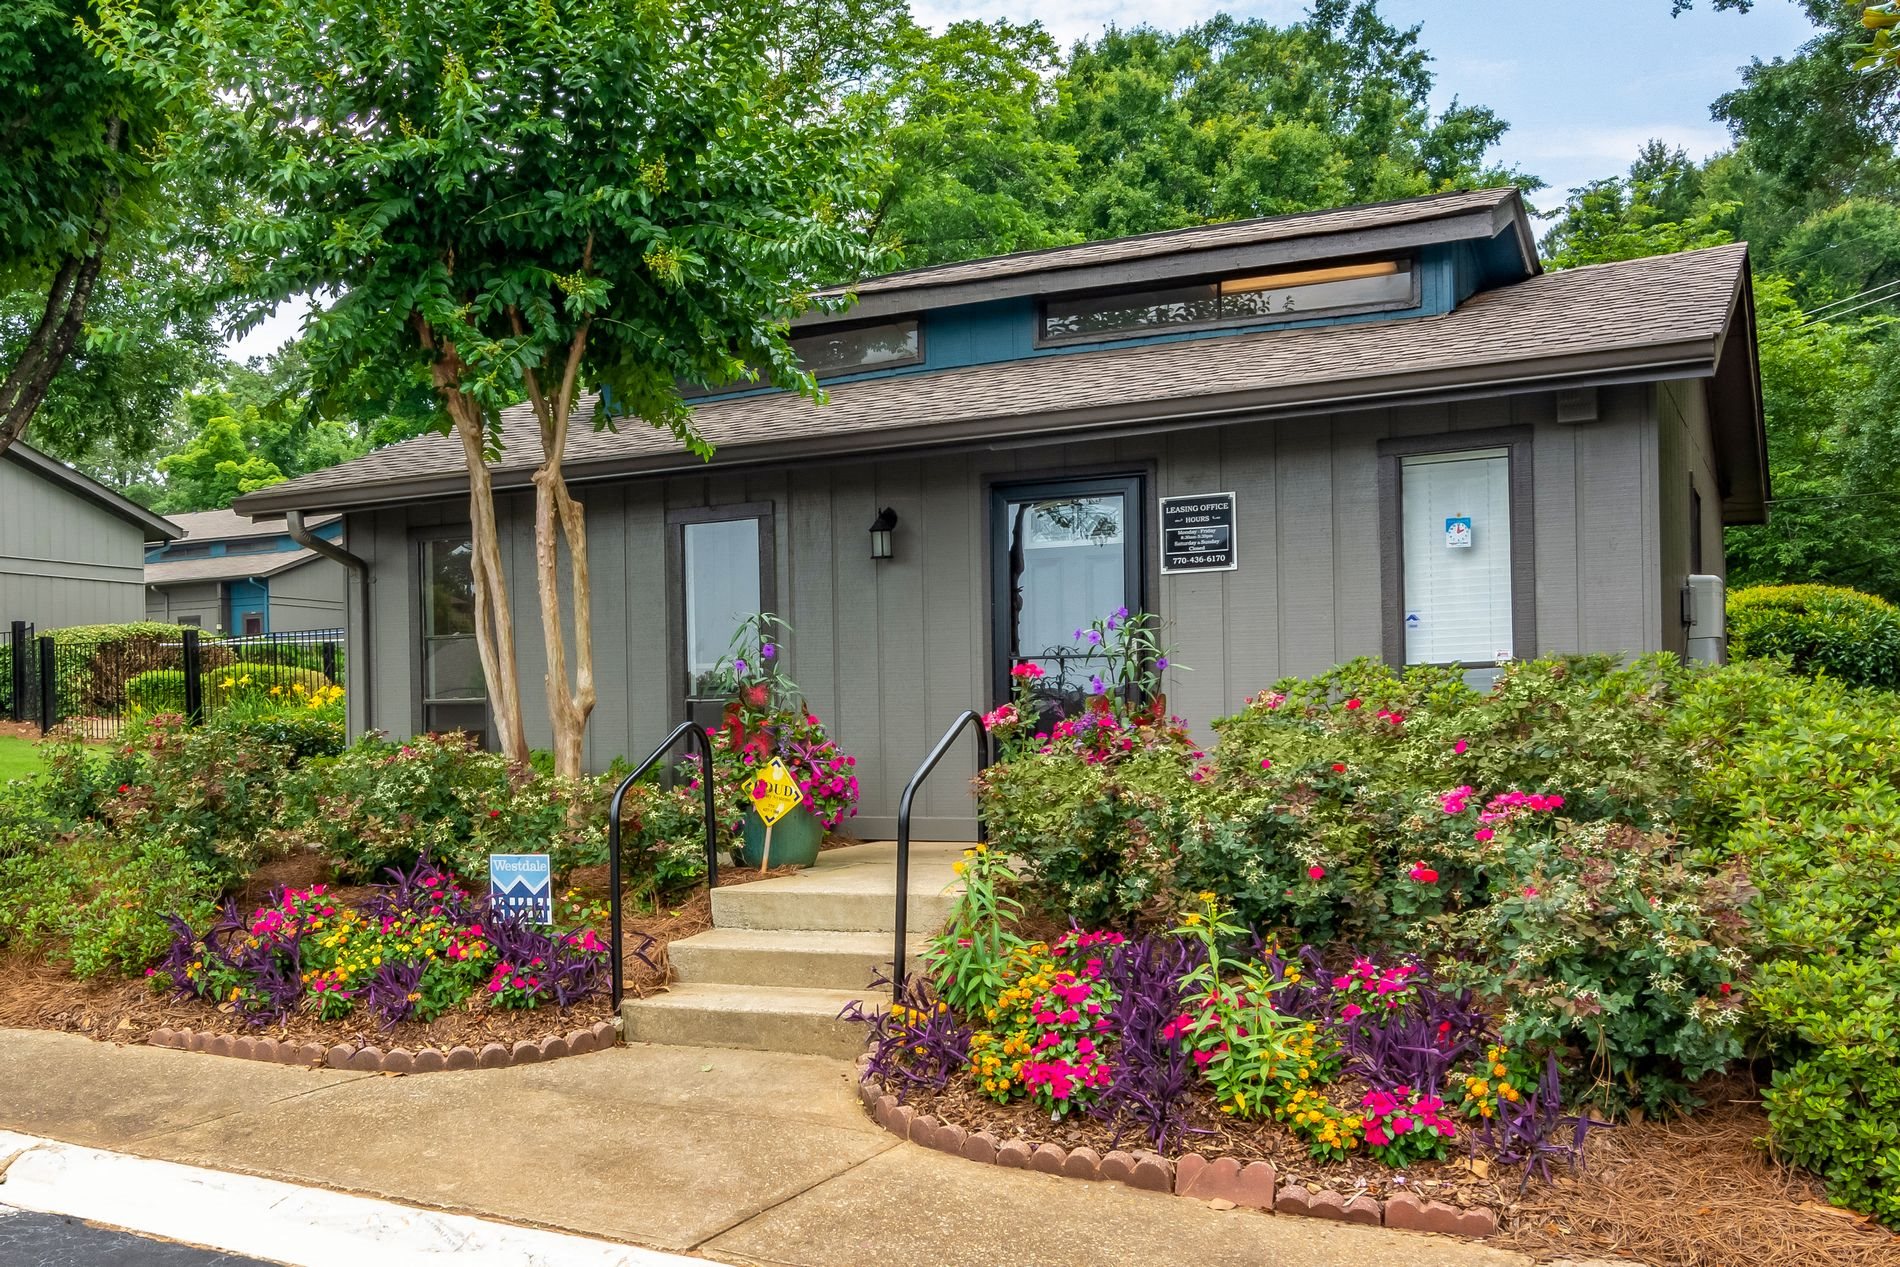 Leasing Office Exterior at Pine Village North Apartment Homes in Smyrna, Georgia, GA